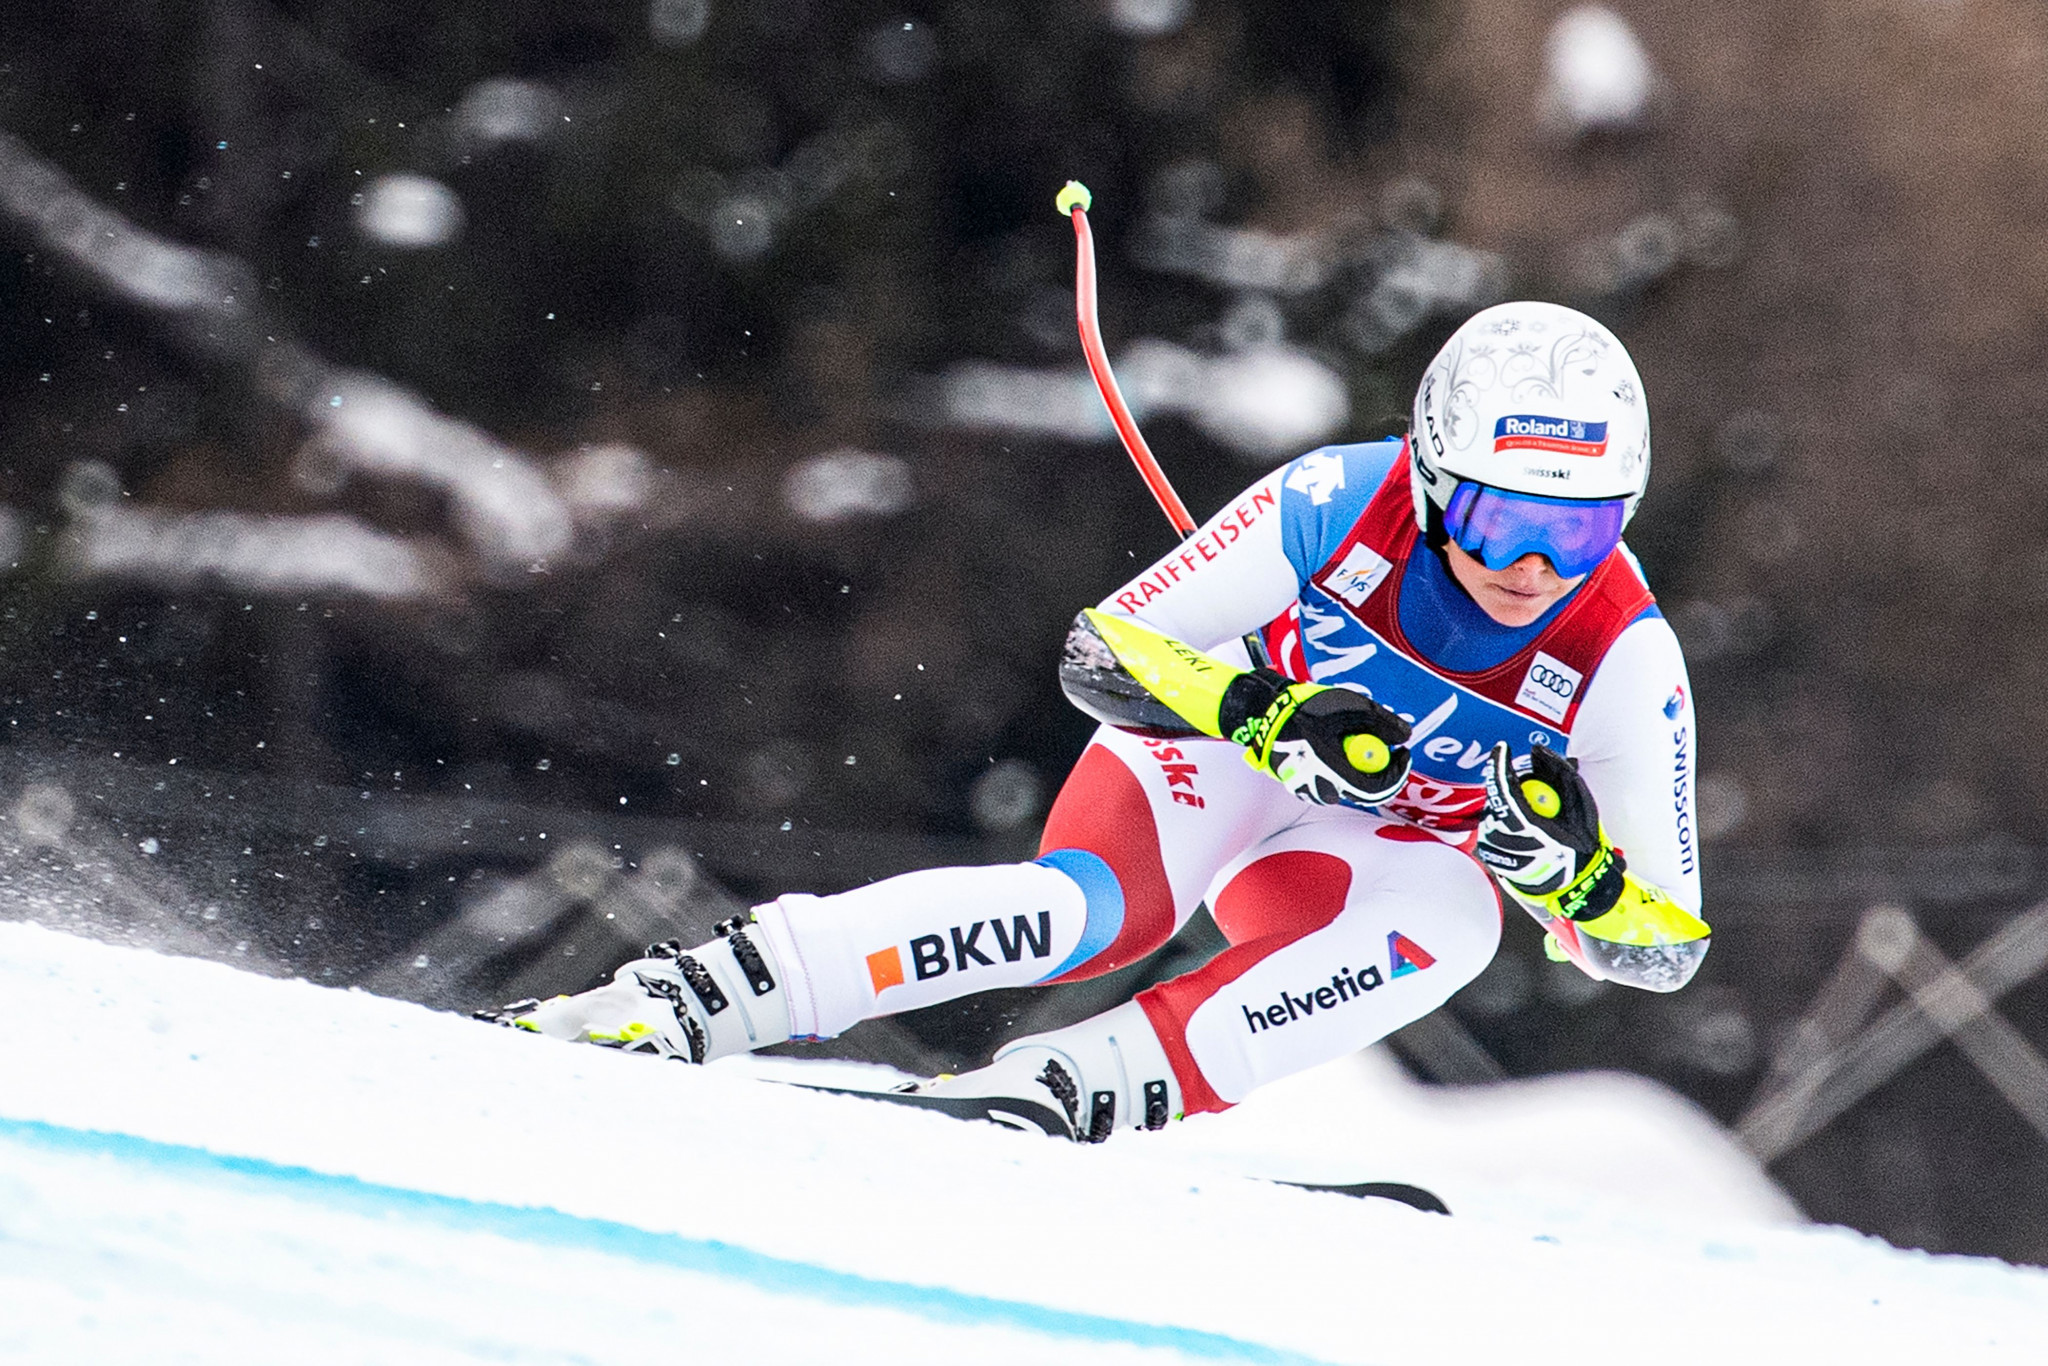 Val d'Isere to host opening downhill and super-G events of women's Alpine World Cup season